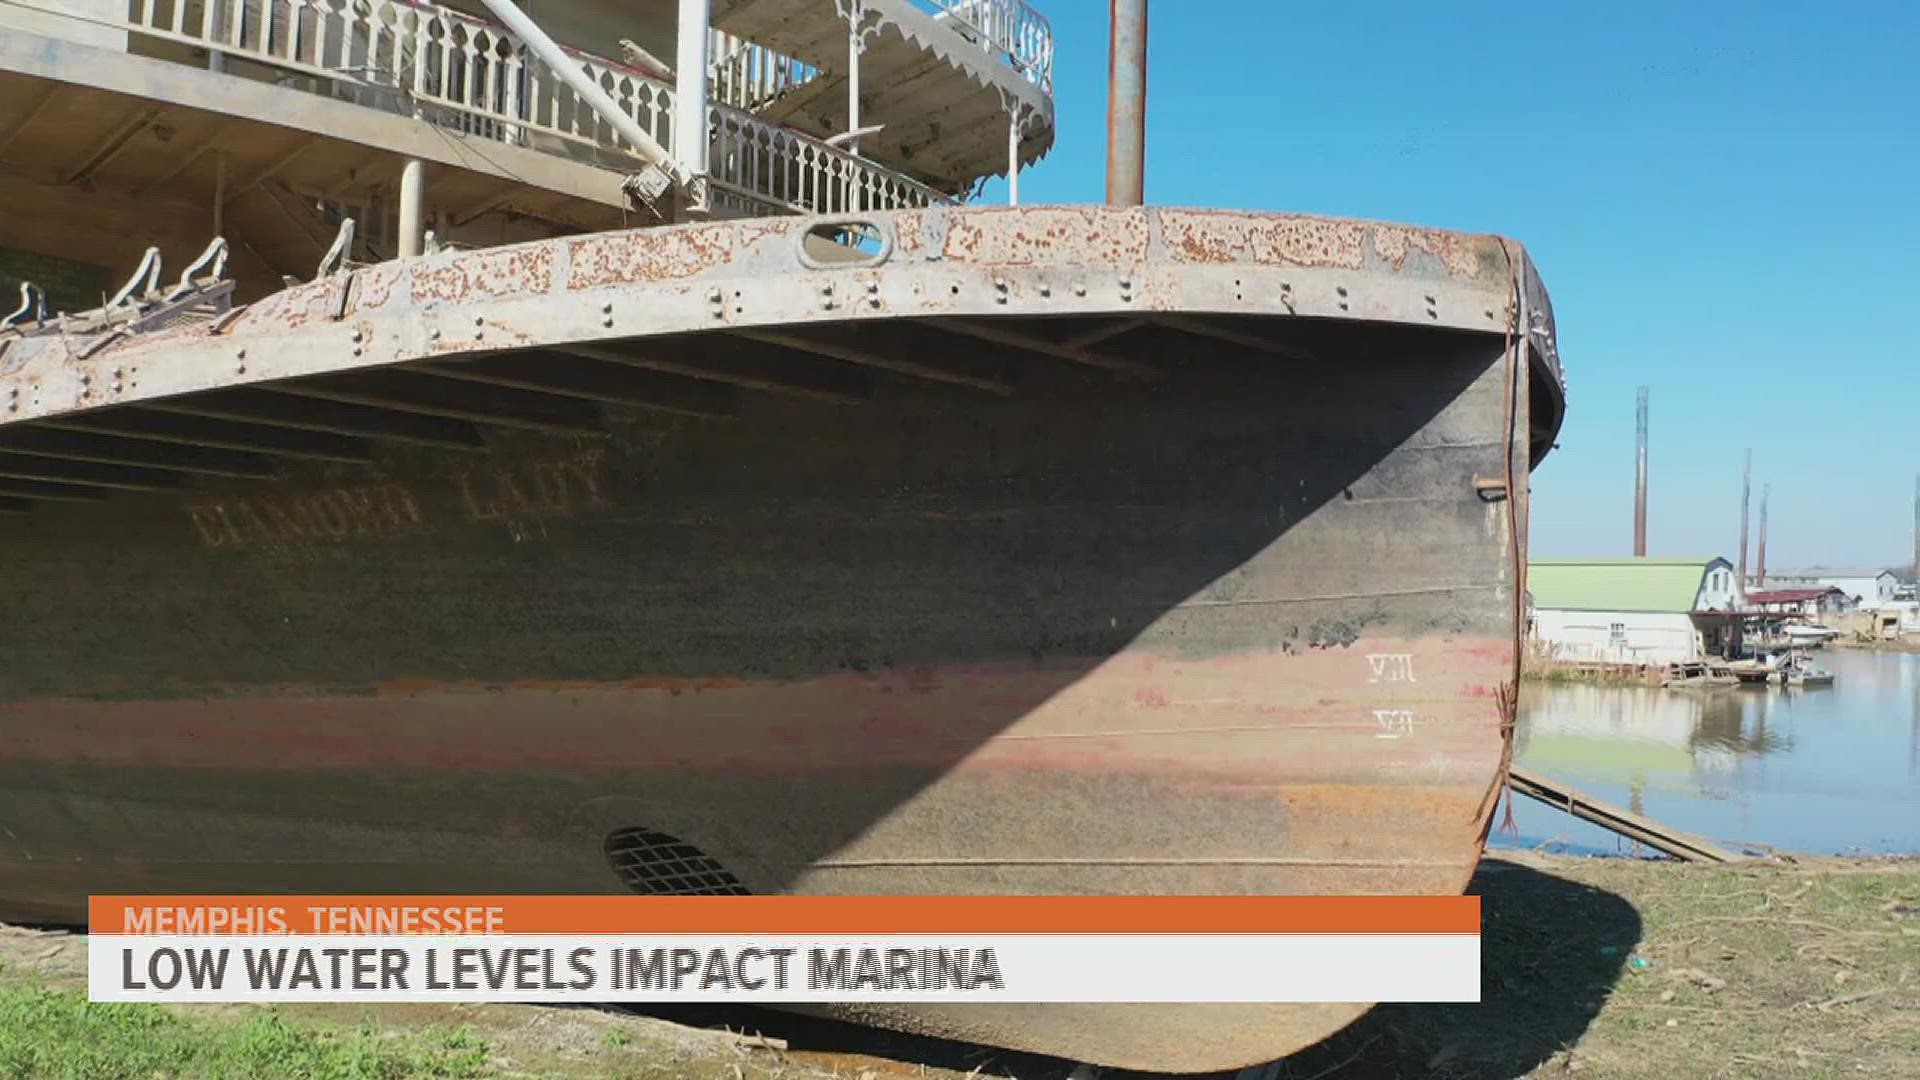 One Memphis marina is seeing extensive damage, including boats tossed around like toys due to record low water levels.